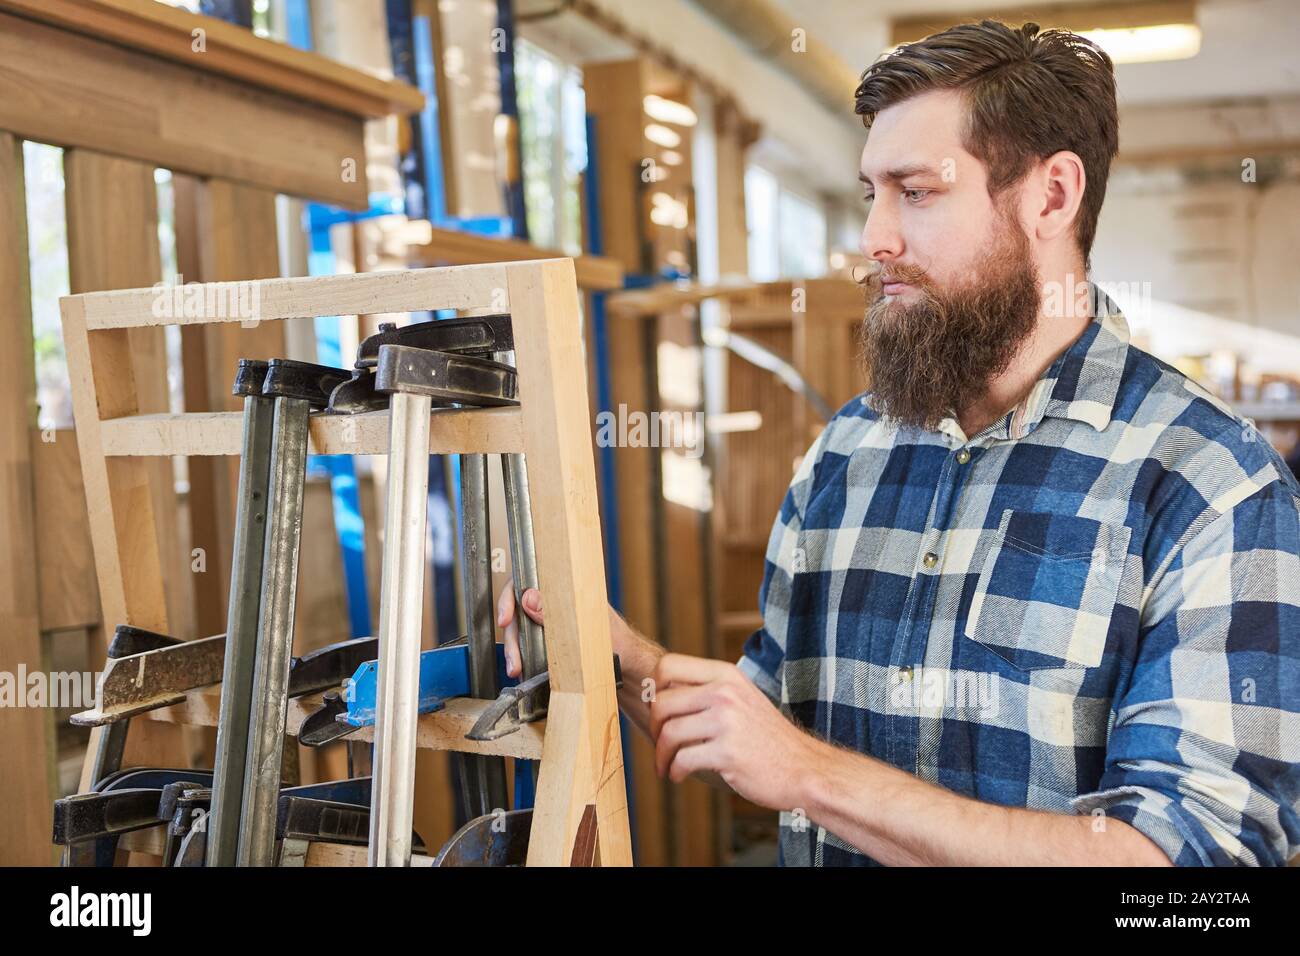 Hipster man with a beard as a carpenter or furniture maker works with clamps Stock Photo